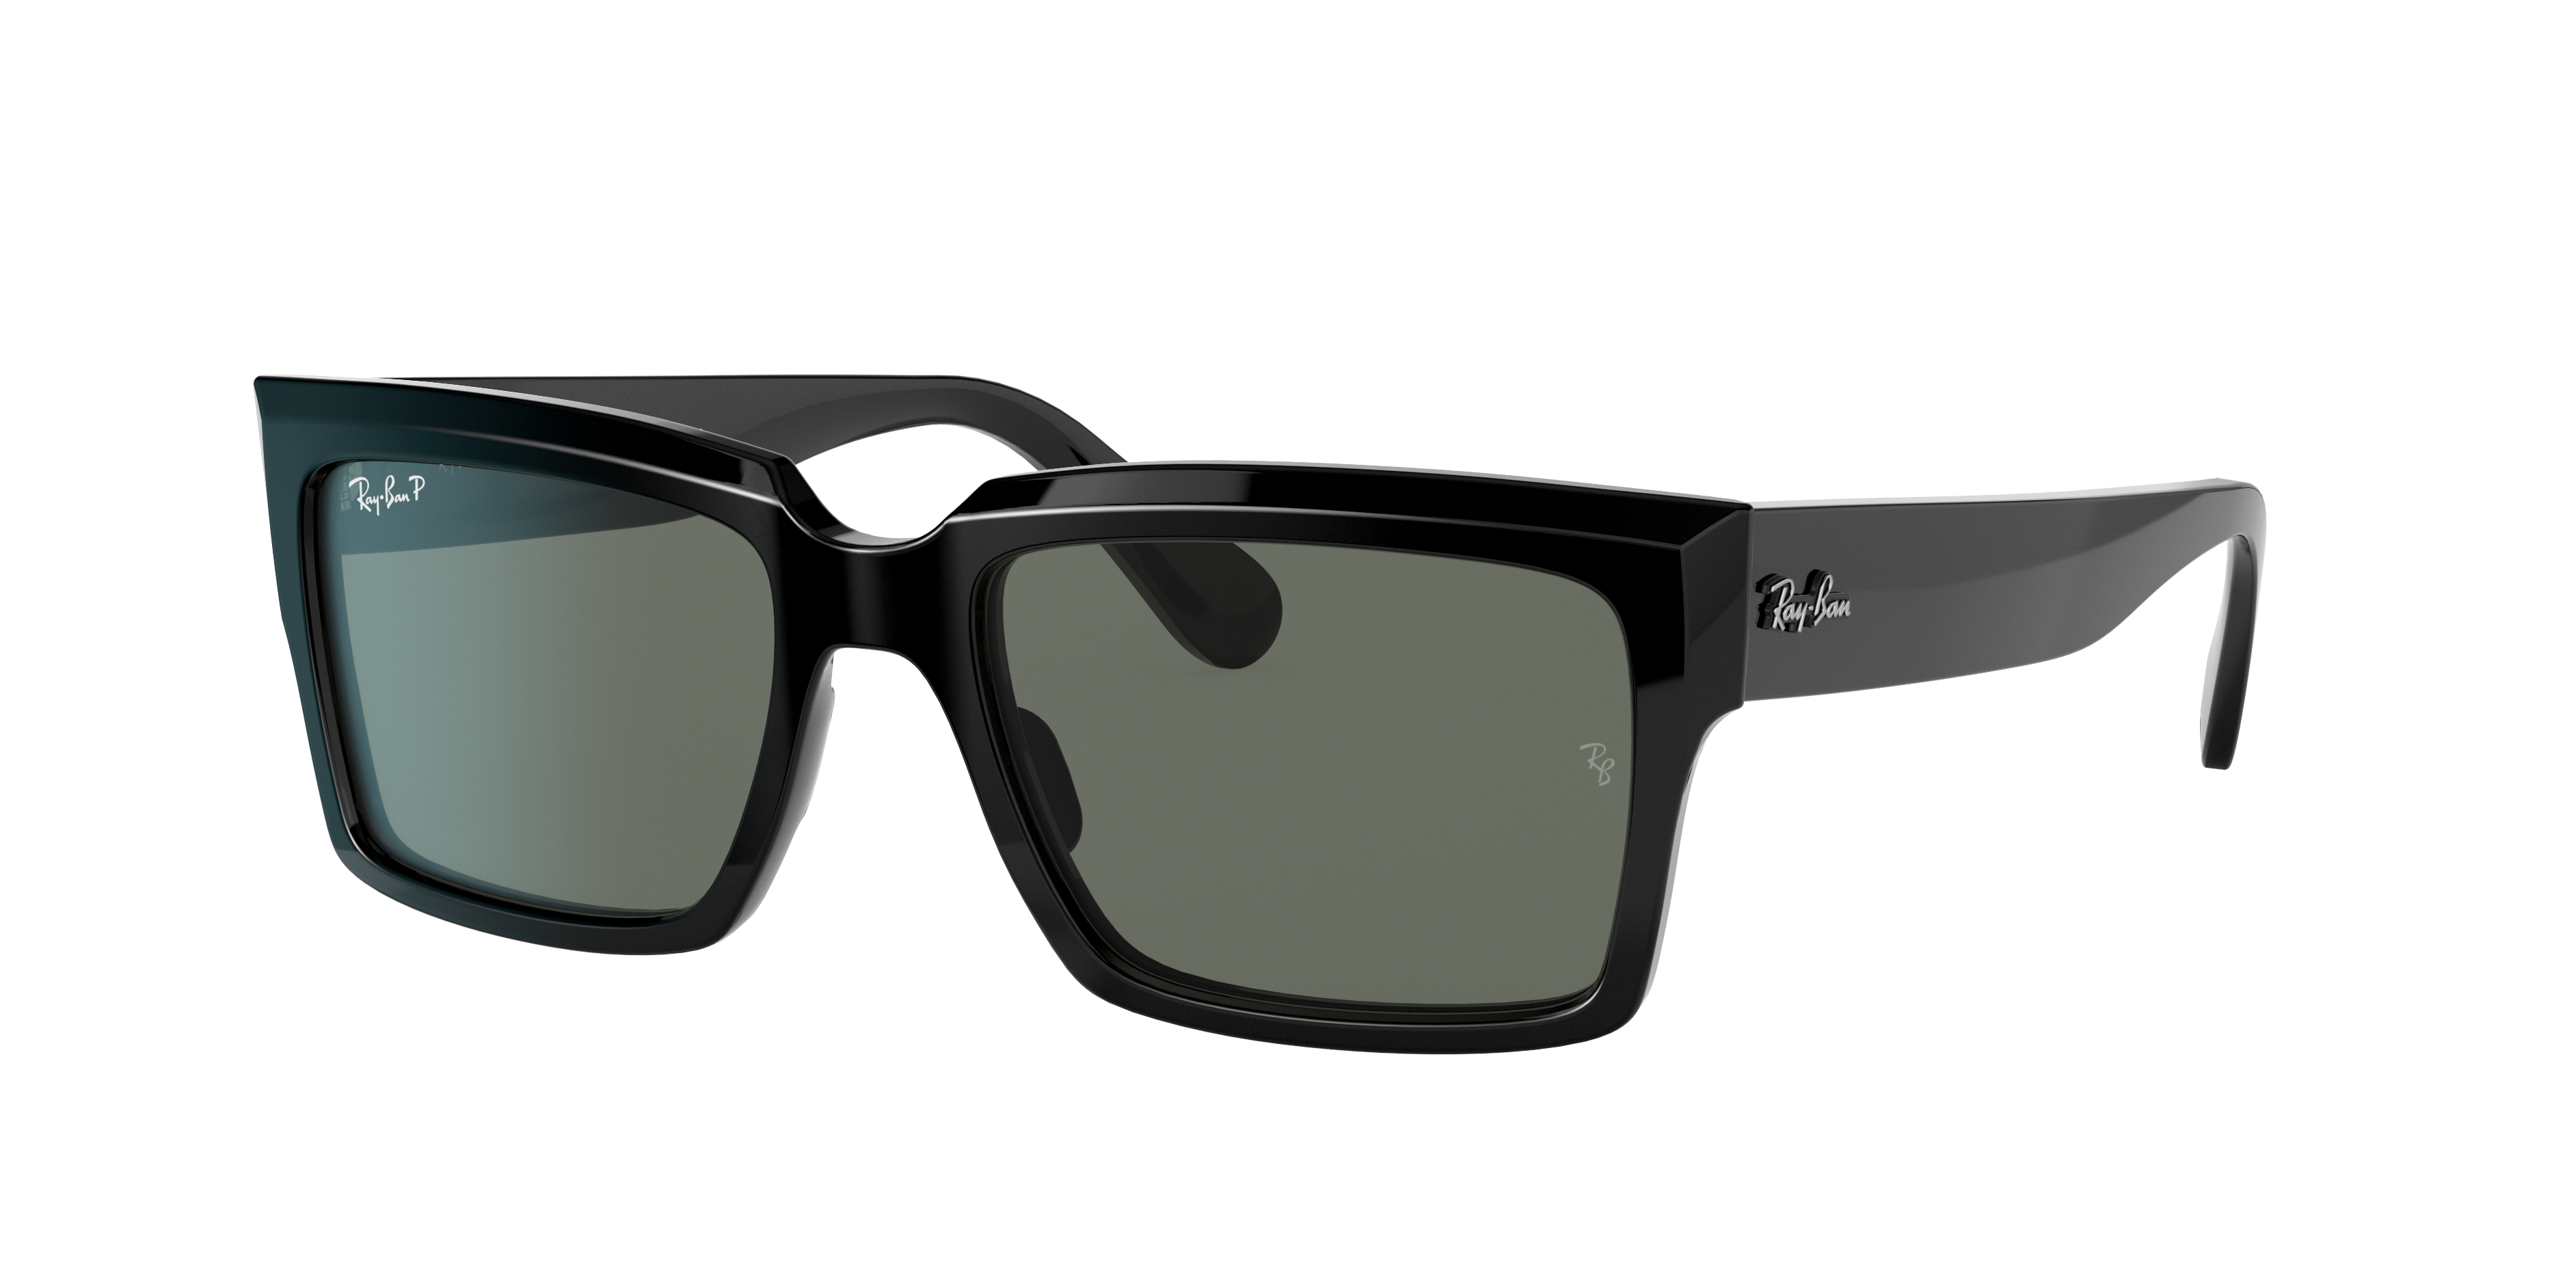 Inverness Sunglasses in Black and Green | Ray-Ban®